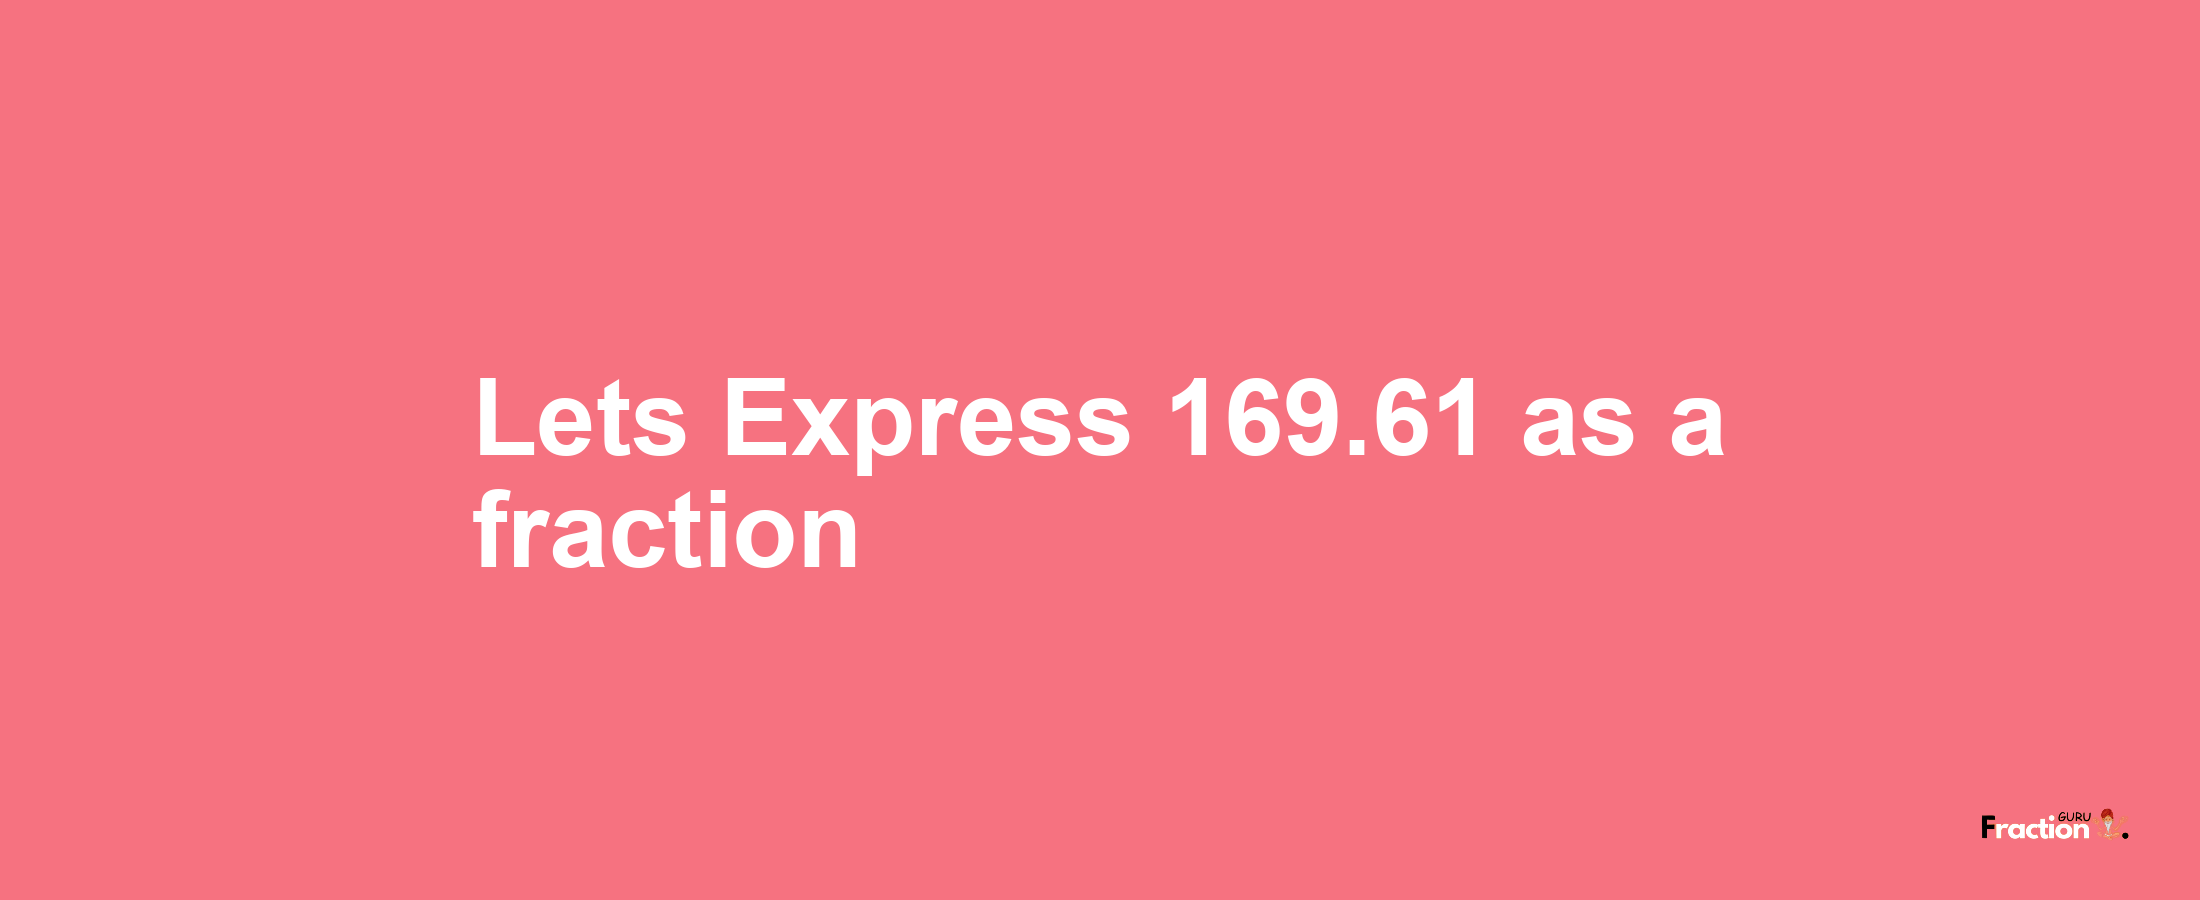 Lets Express 169.61 as afraction